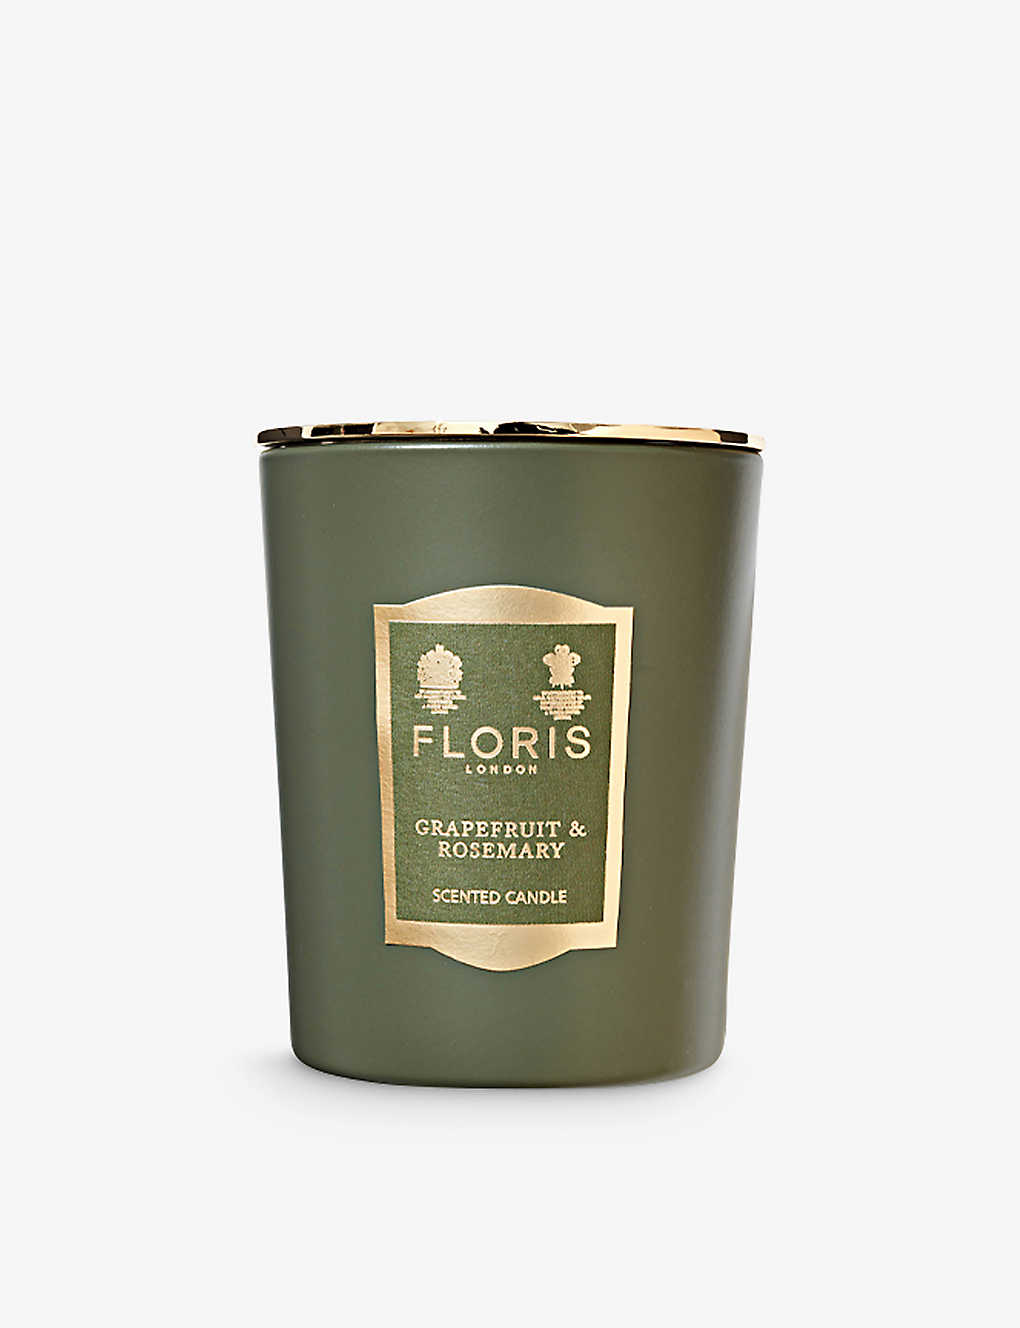 Floris Grapefruit And Rosemary Scented Candle 175g